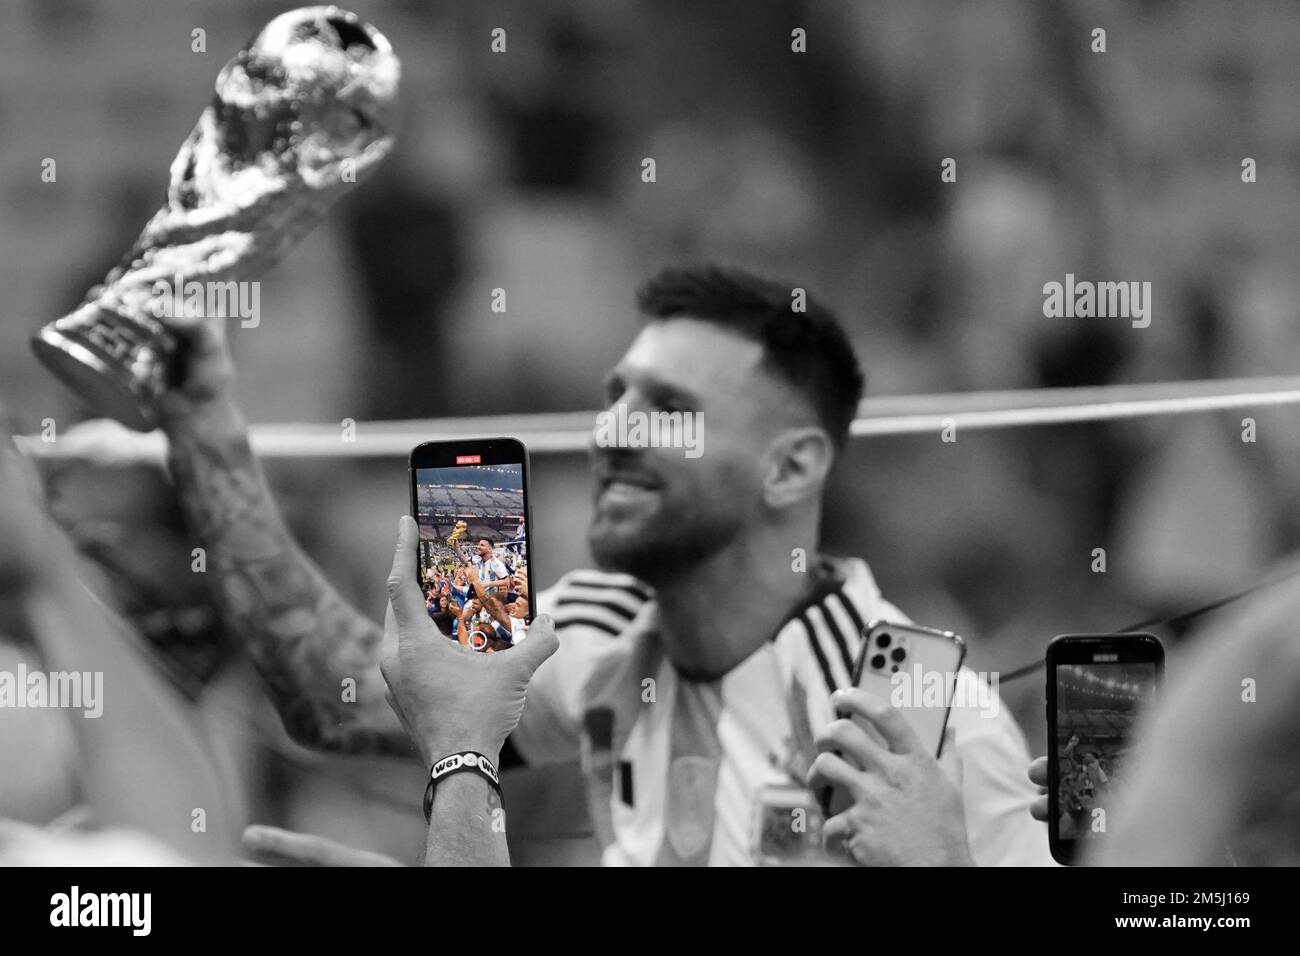 Lusail, Qatar. Fifa World Cup. Match 64. Argentina vs France. 18th December 2022. Leo Messi celebrate with fake cup. Stock Photo